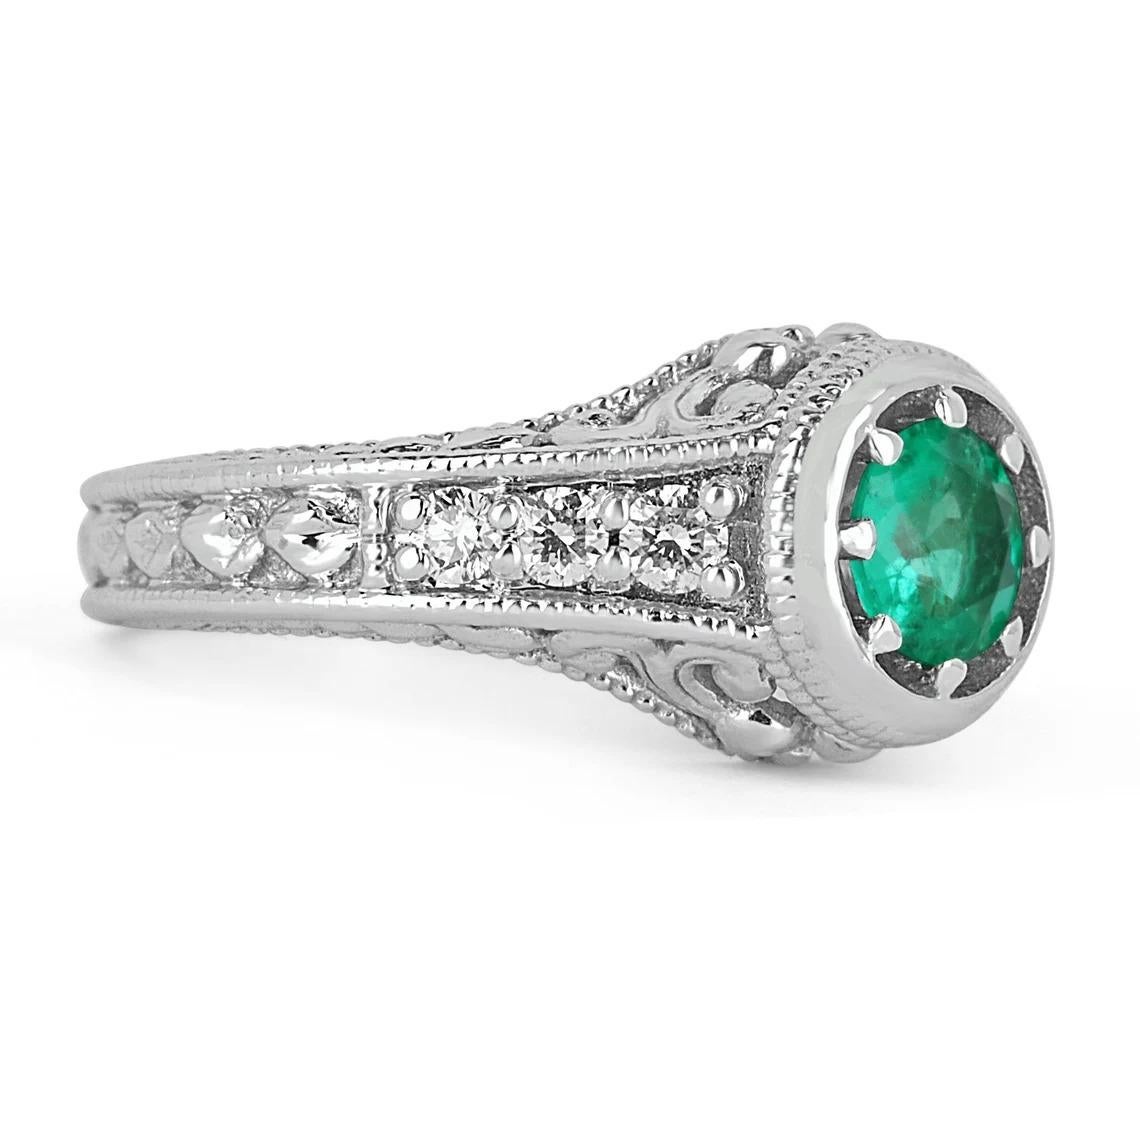 Now, this ring is truly spectacular! Such a magical ring that only weighs 0.98tcw but looks to be over 1.50tcw. This ring takes 'solitaire with accents' to another level. Earth mined, Colombian Emerald is prong-set in a suspended eight prong